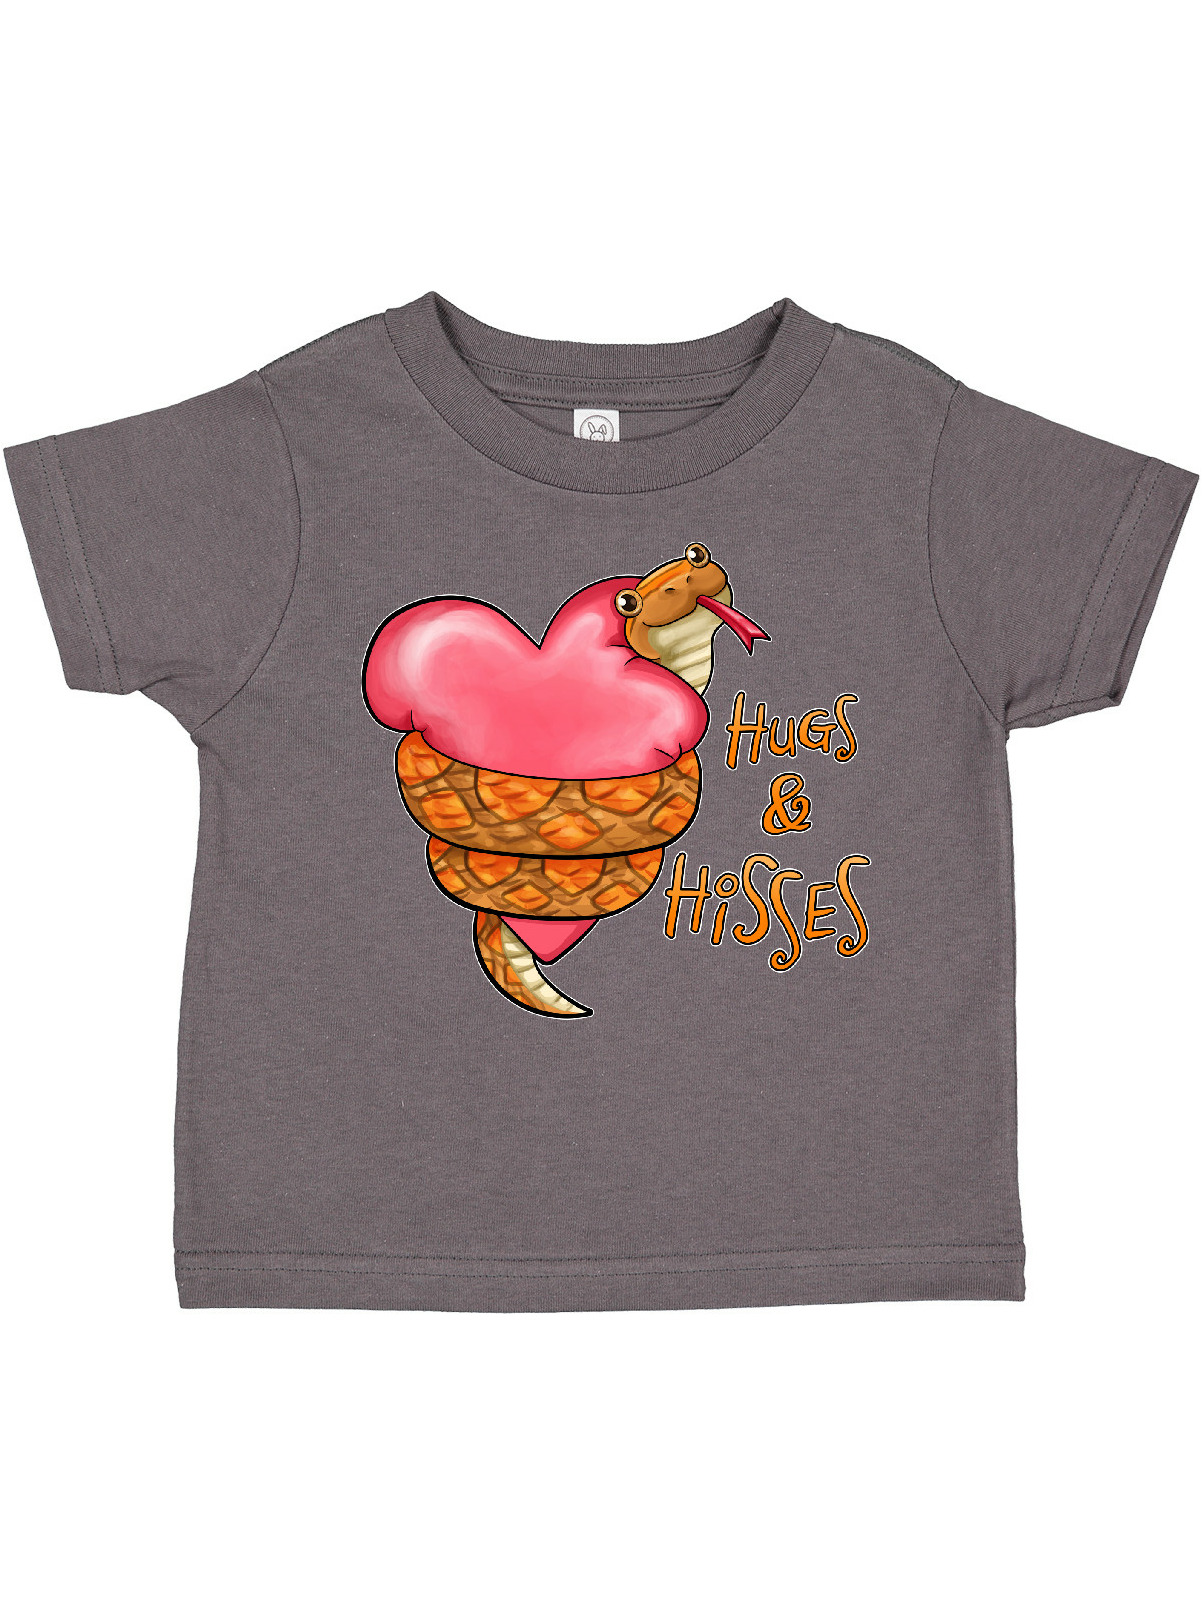 Inktastic Hugs and Hisses- Cute Snake and Heart Boys or Girls Toddler T-Shirt - image 1 of 4